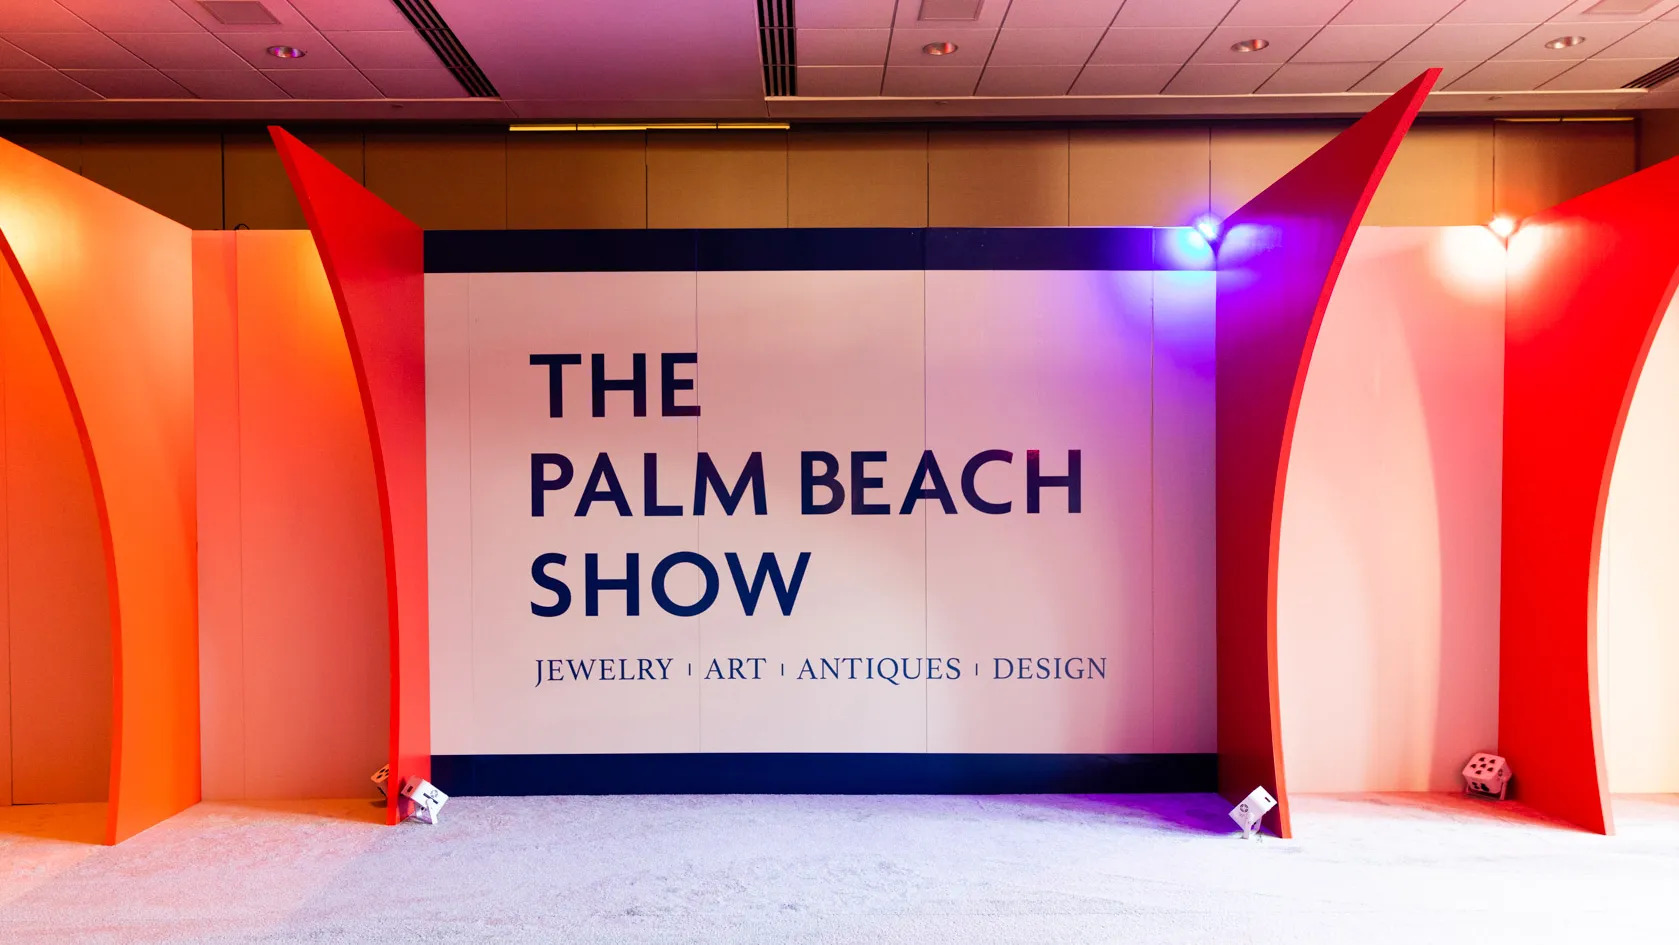 20-facts-about-palm-beach-jewelry-art-antique-show